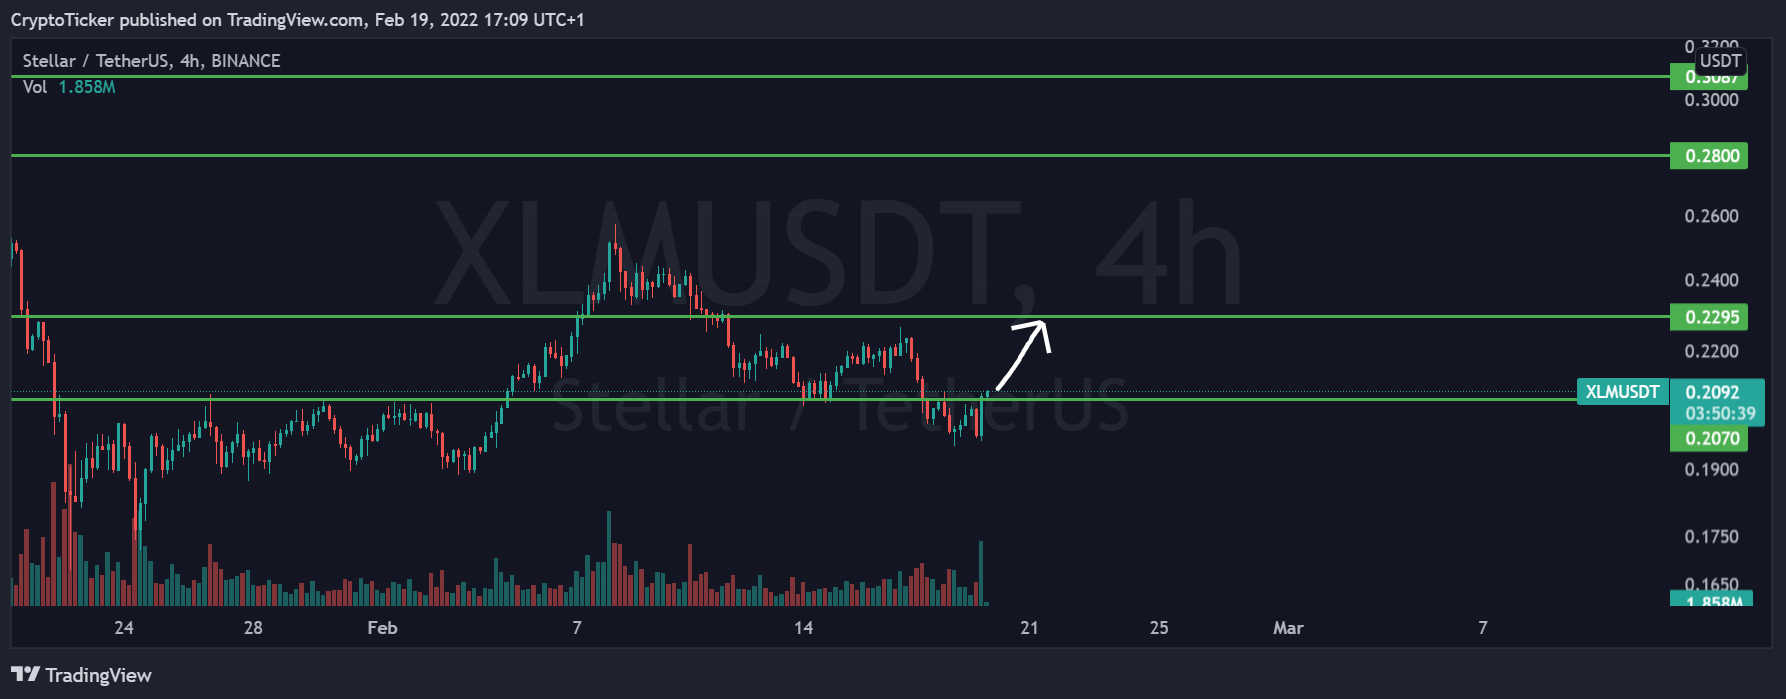 Stellar price: XLM/USDT 4-hours chart showing the potential uptrend of XLM